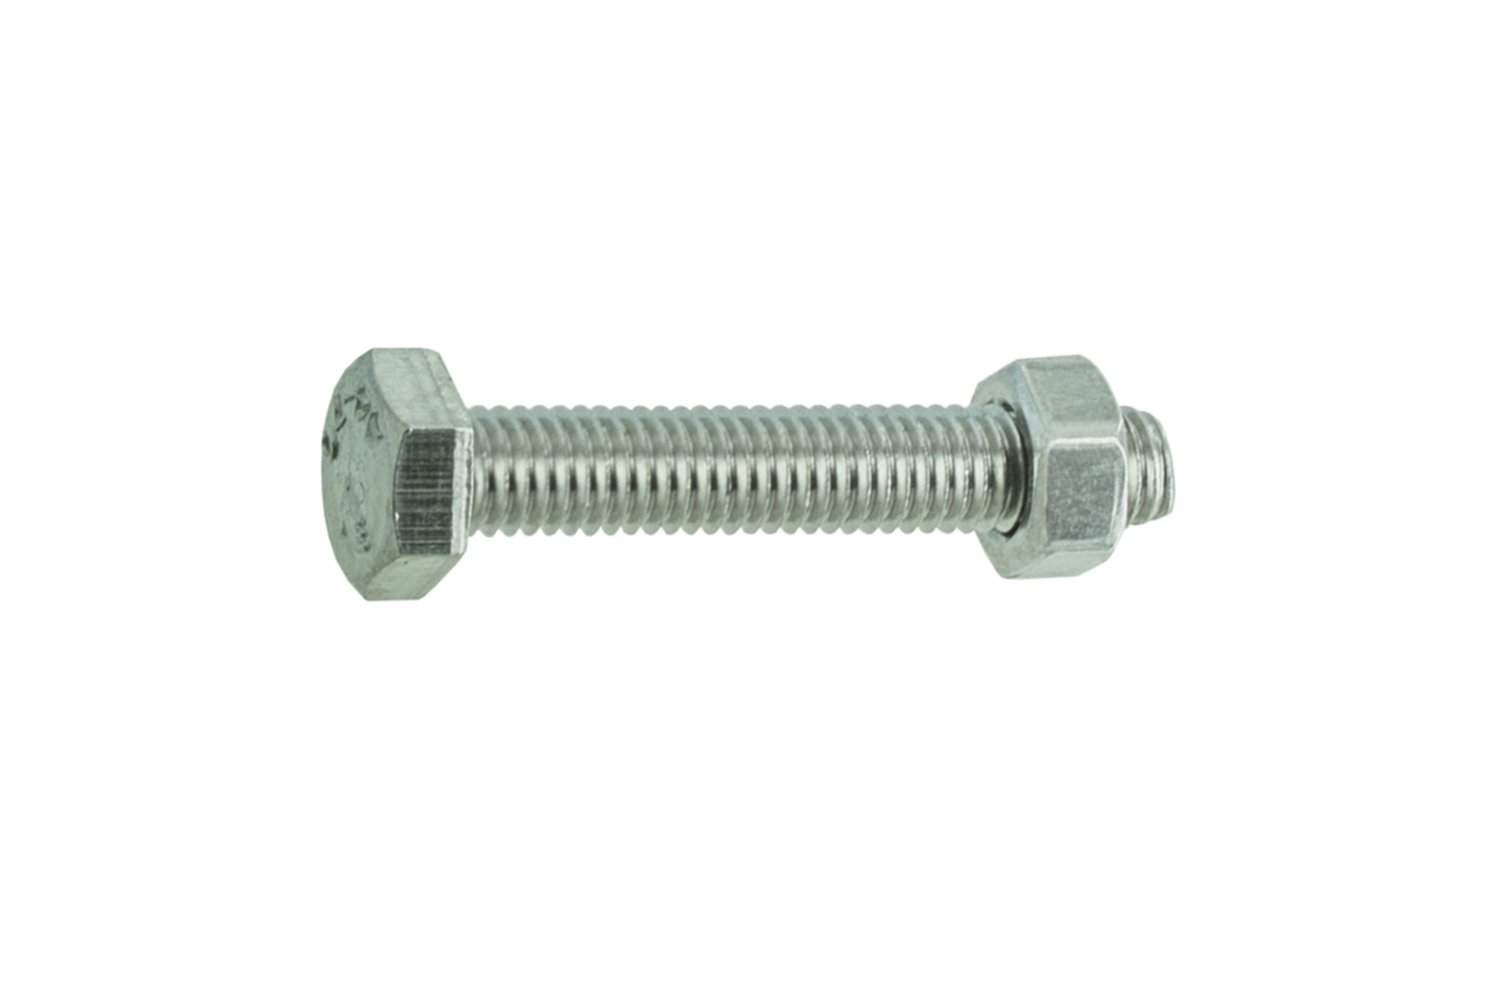 Hex head bolt stainless steel A4 8x80mm, 3 pieces.